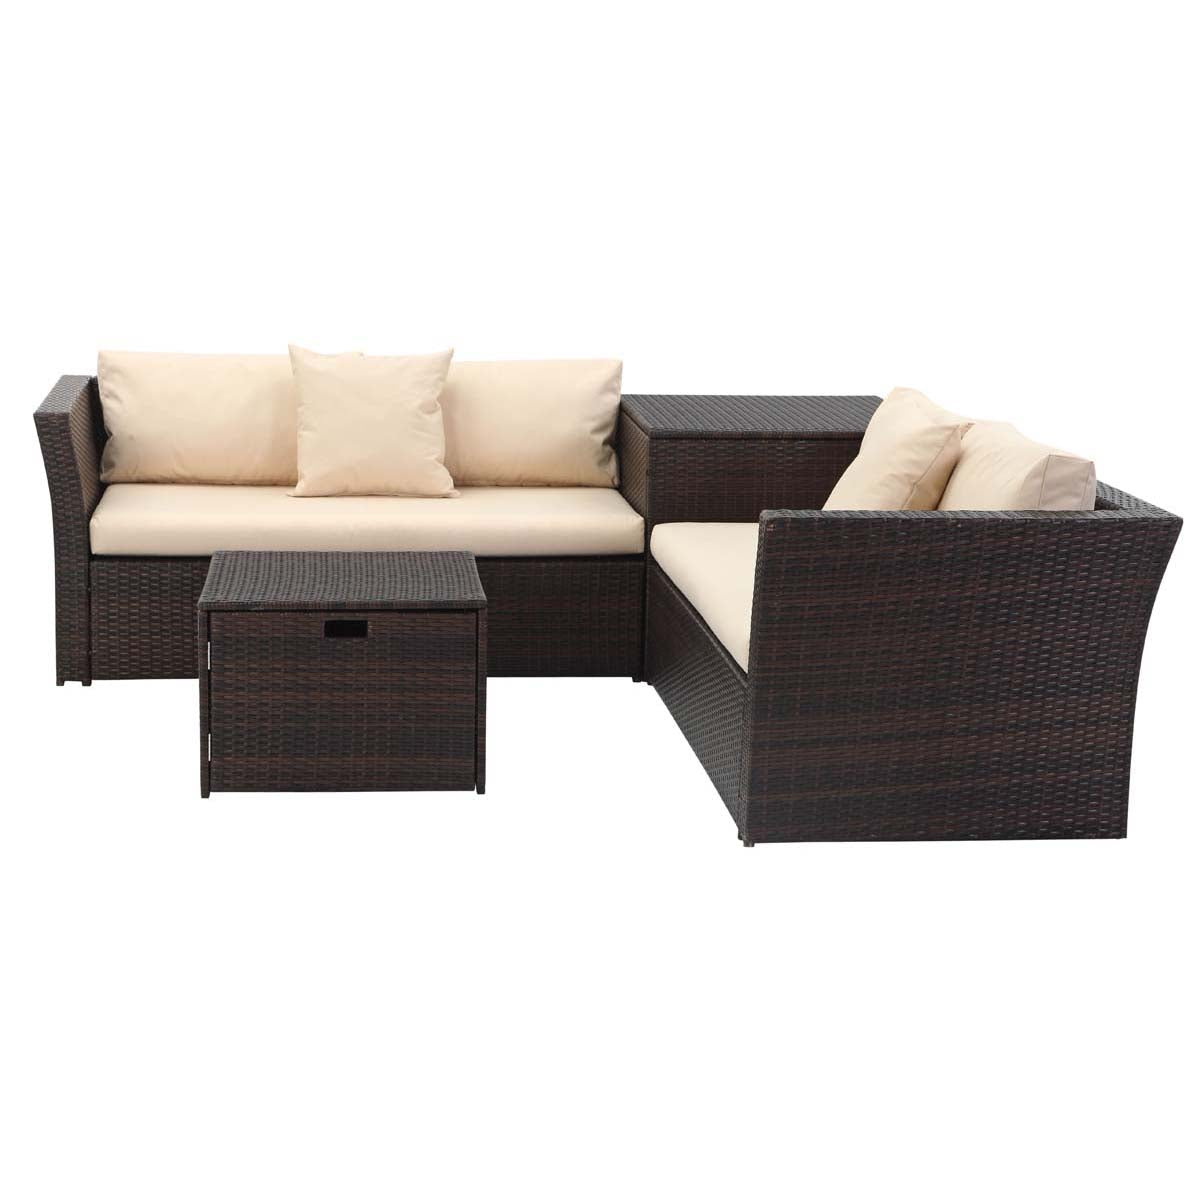 Safavieh Welch Outdoor Living Sectional Set With Storage , PAT2513